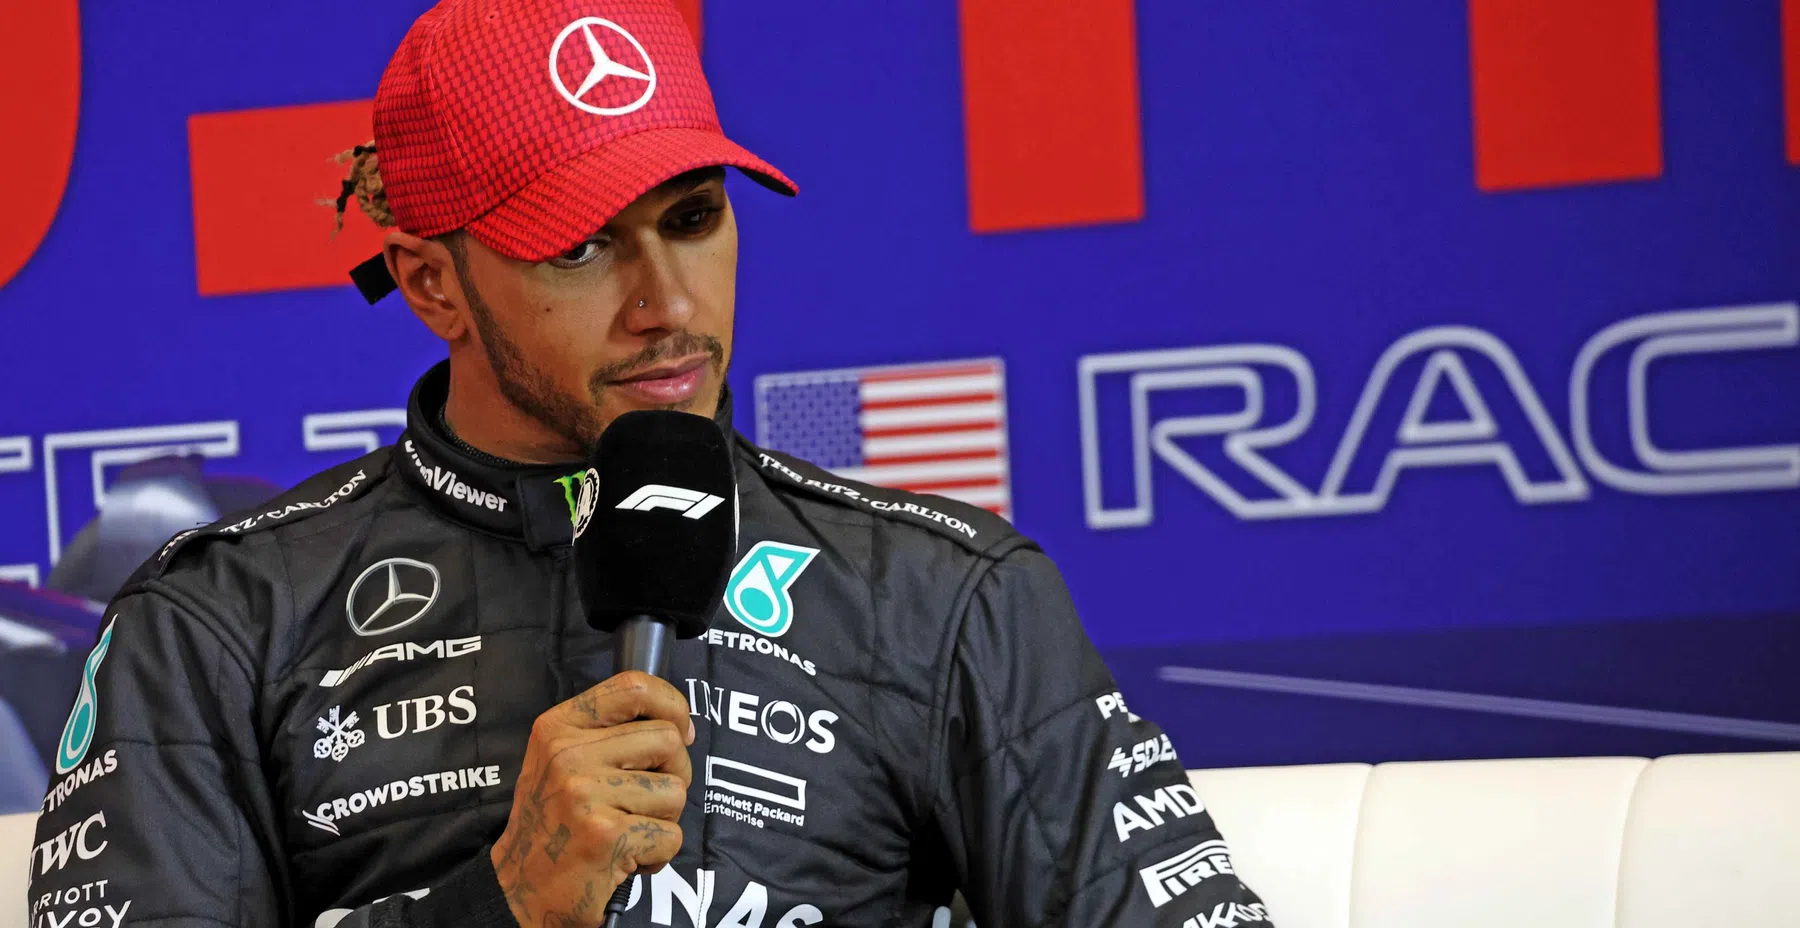 Hamilton learned a lot from Verstappen in united states sprint